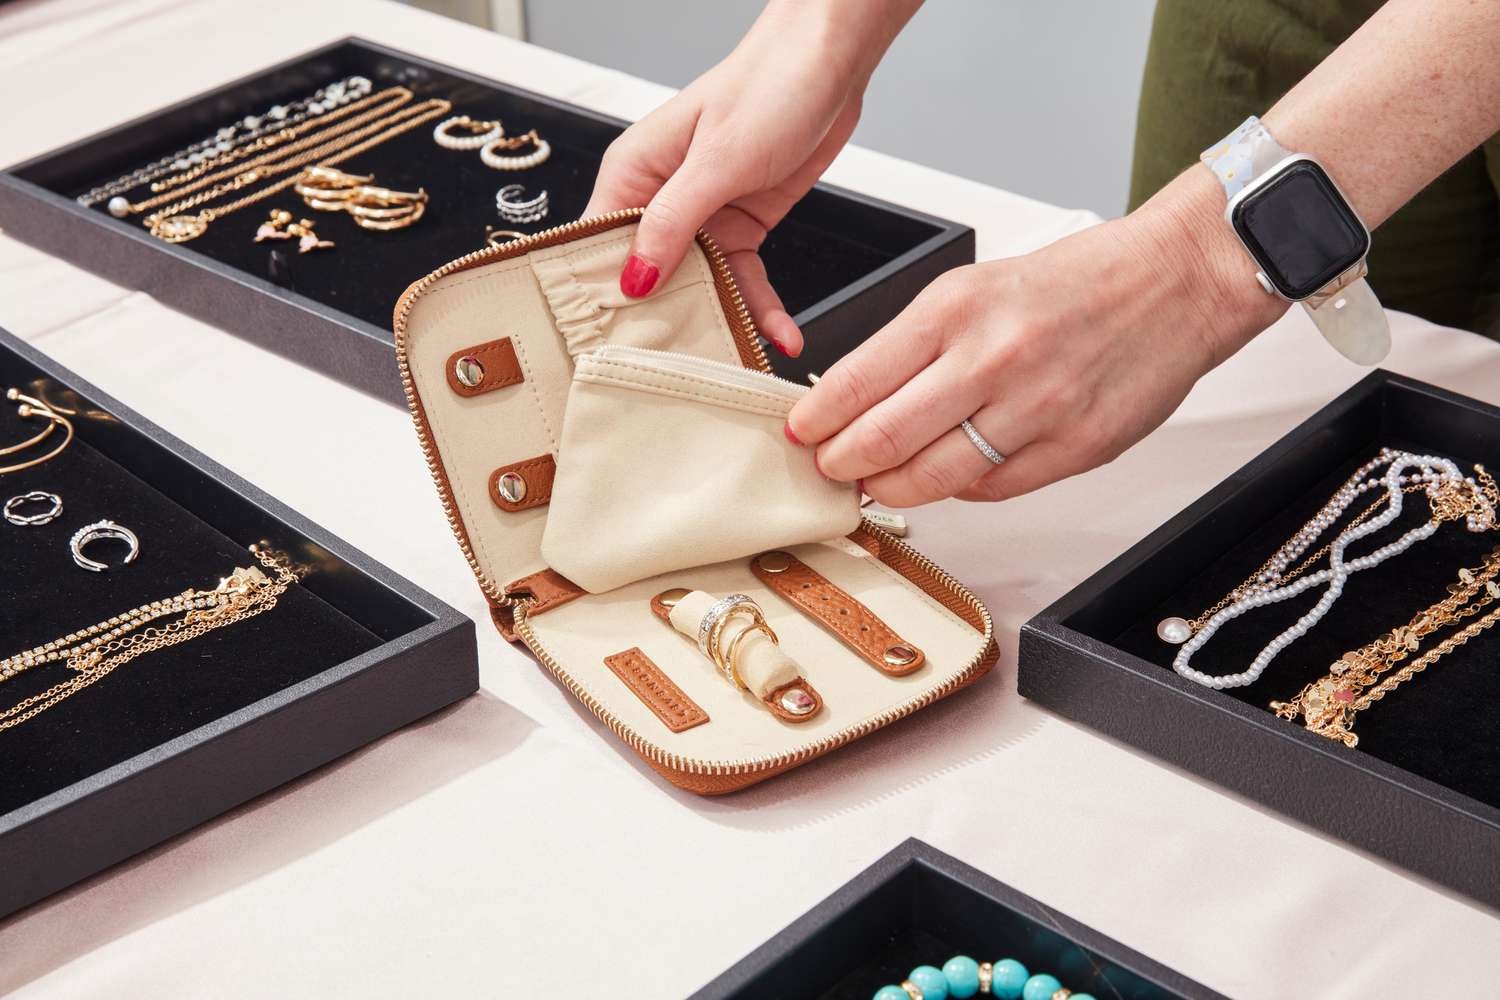 A person puts jewelry into the Levenger Carrie Mini Jewelry Organizer.